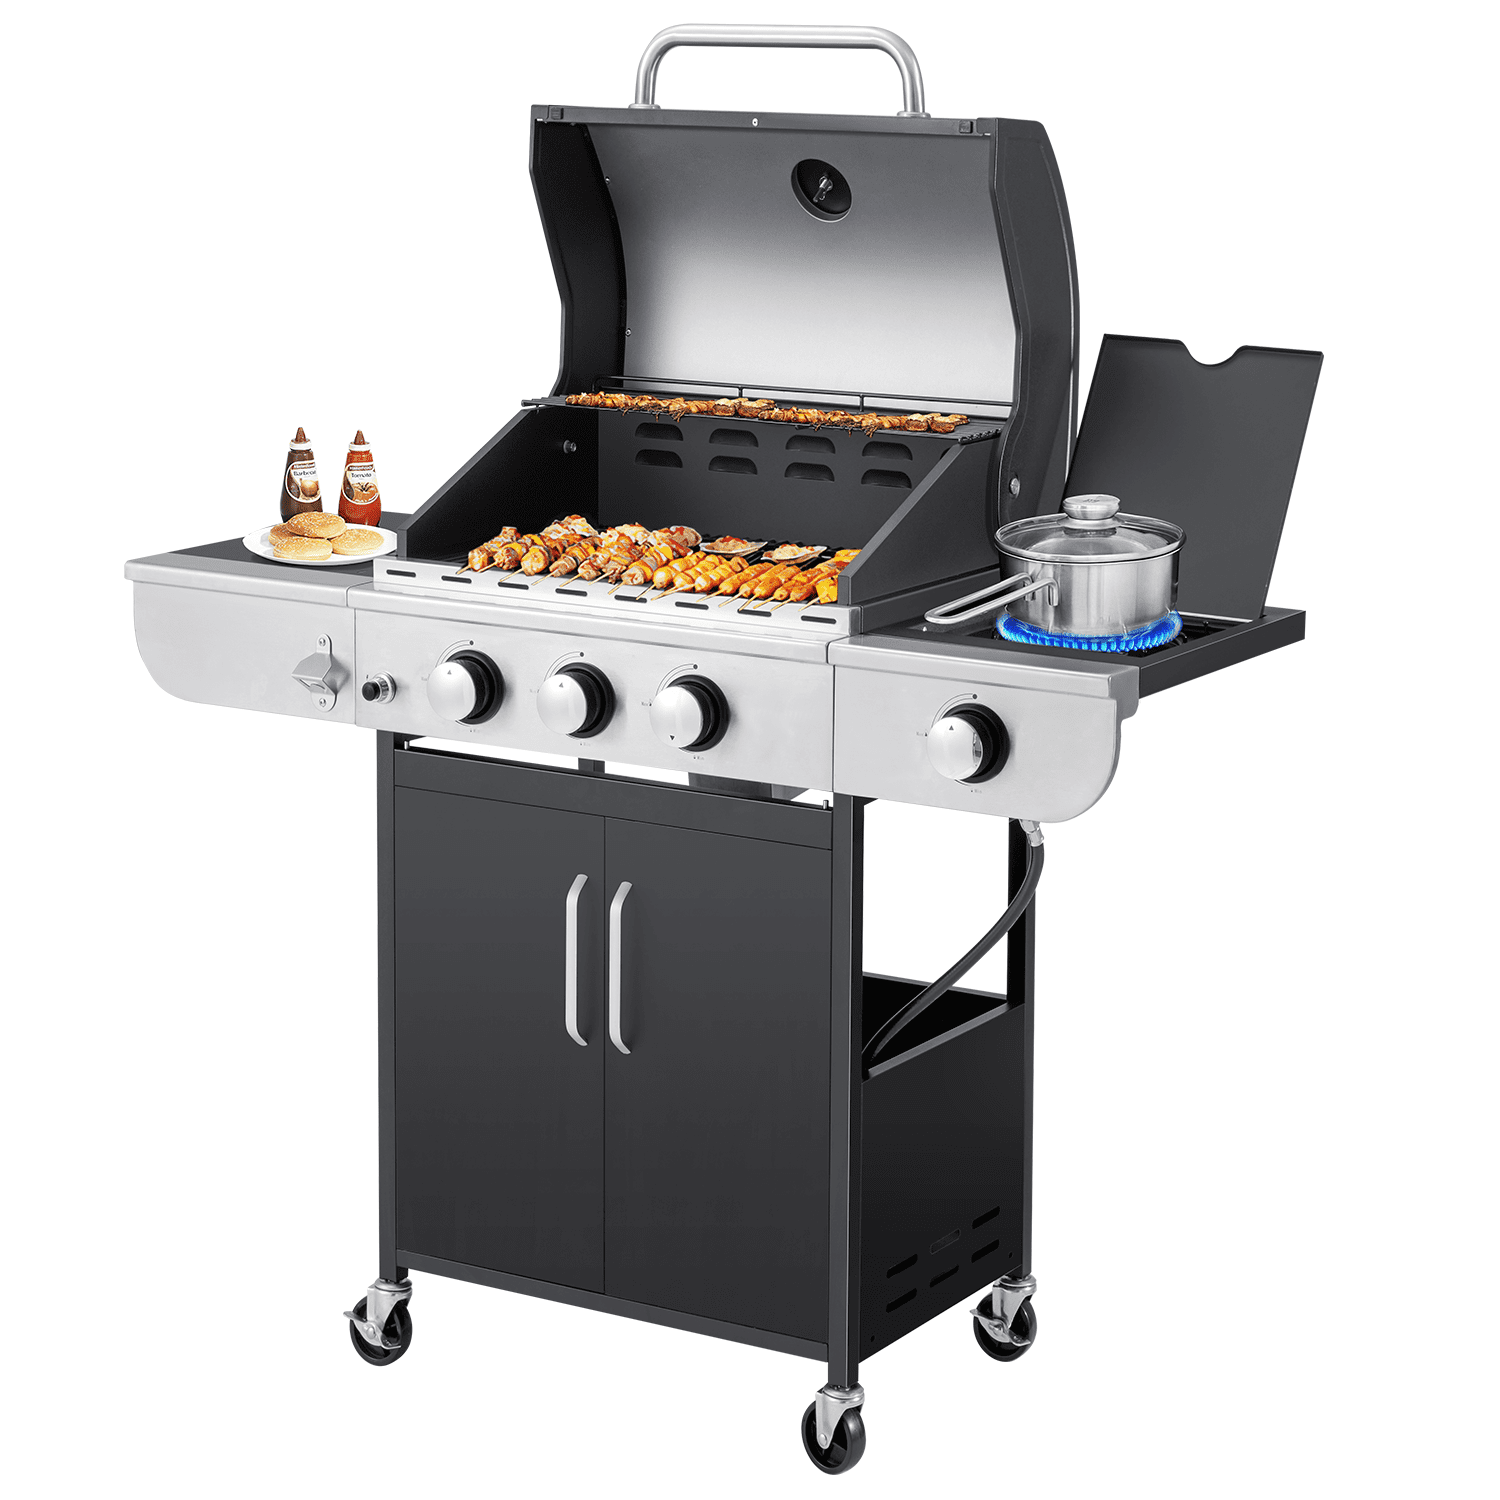 Yoleny 3 Burner 24,000/36,000 BTU Stainless Steel BBQ Propane Gas Grill with Stove and Side Table